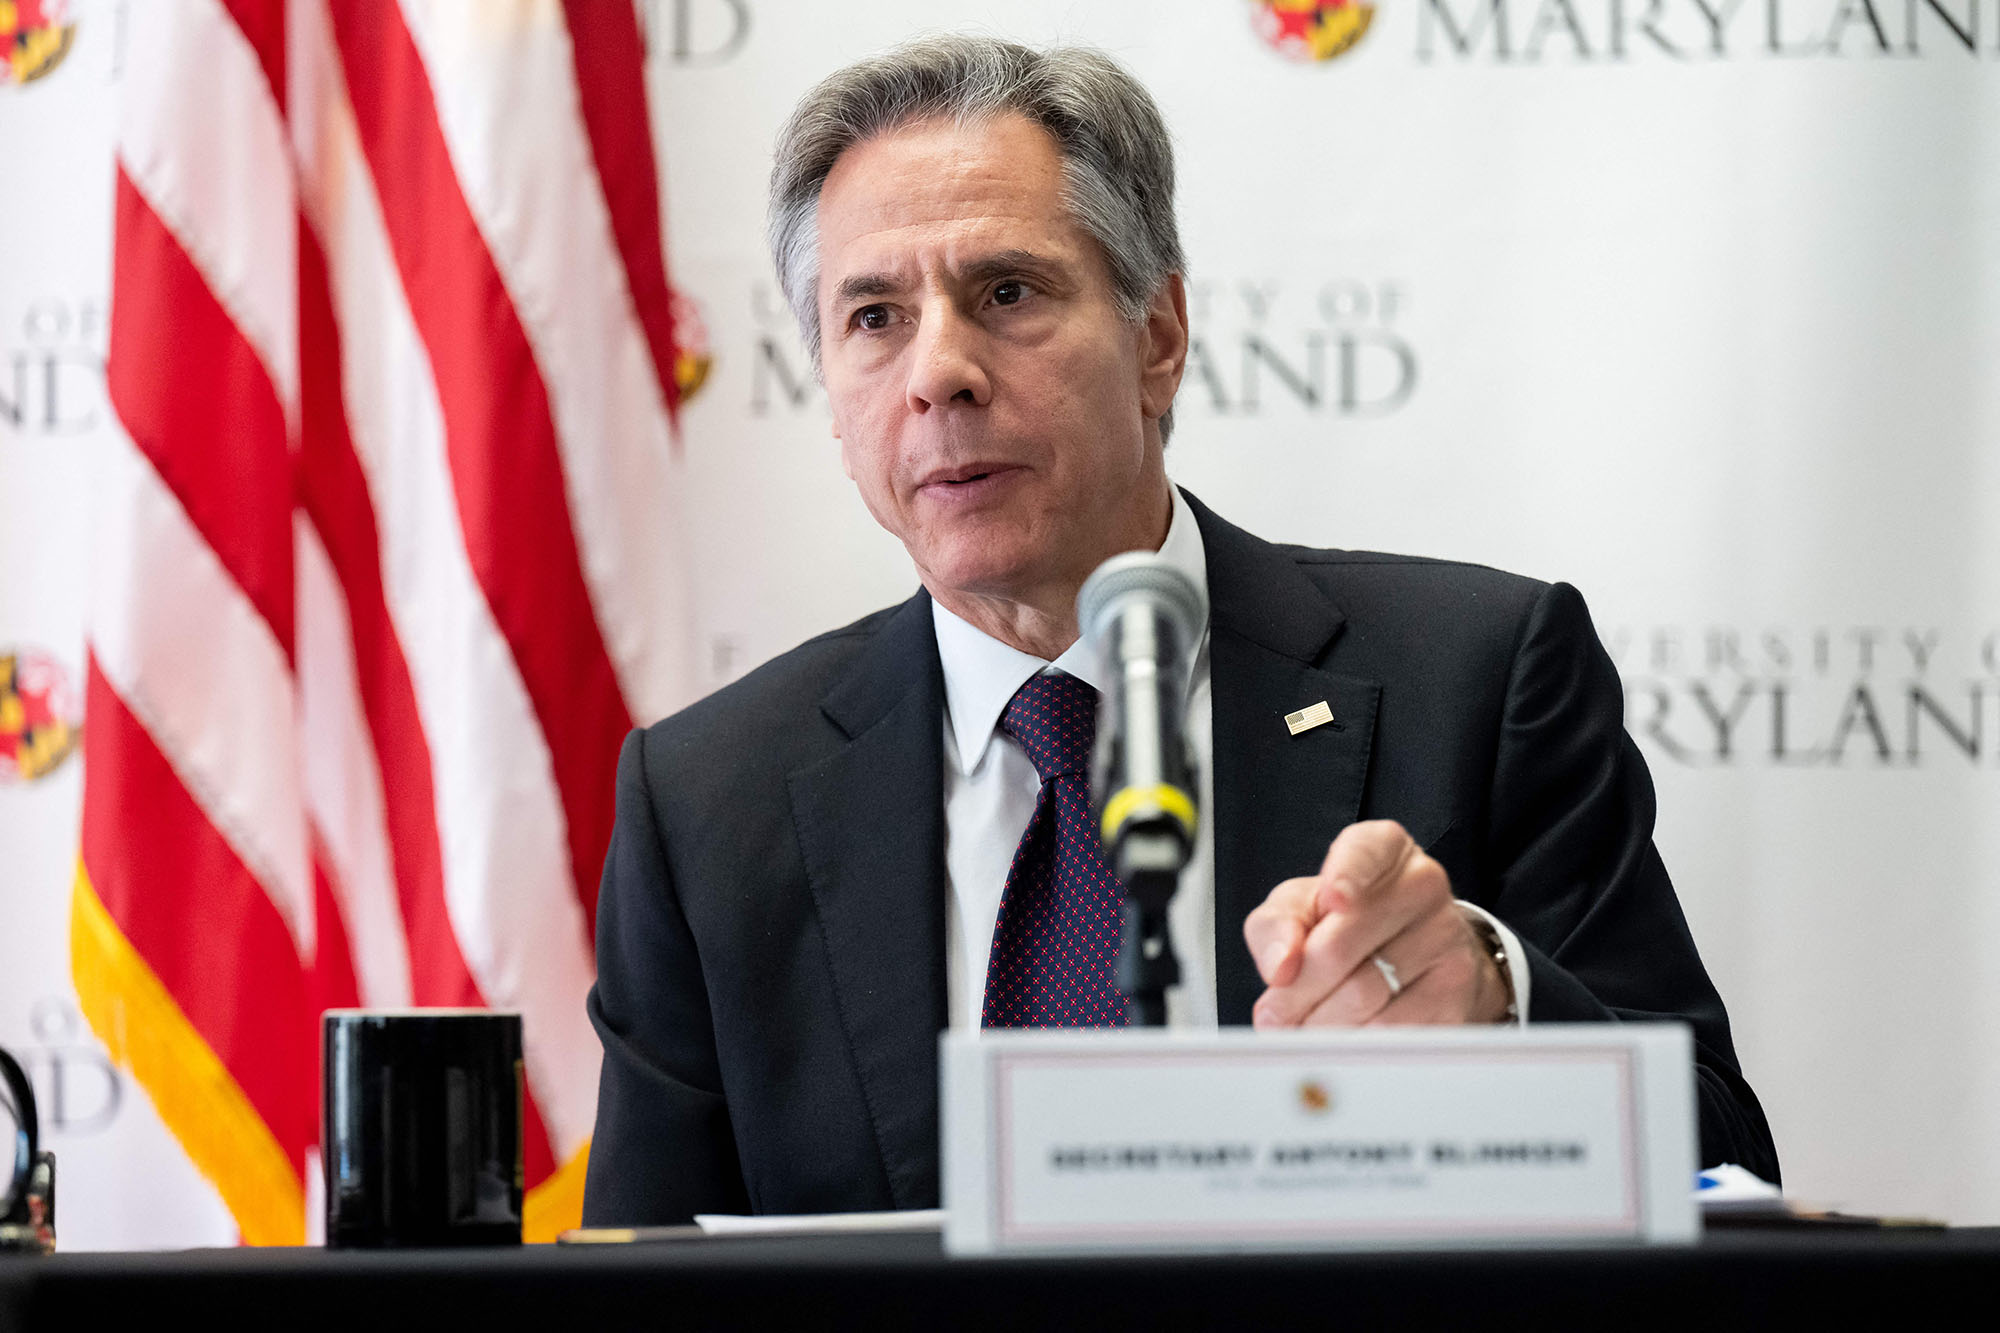 US Secretary of State Antony Blinken speaks during a US - EU Stakeholder Dialogue during the Trade and Technology Council (TTC) Ministerial Meeting at the University of Maryland on December 5.